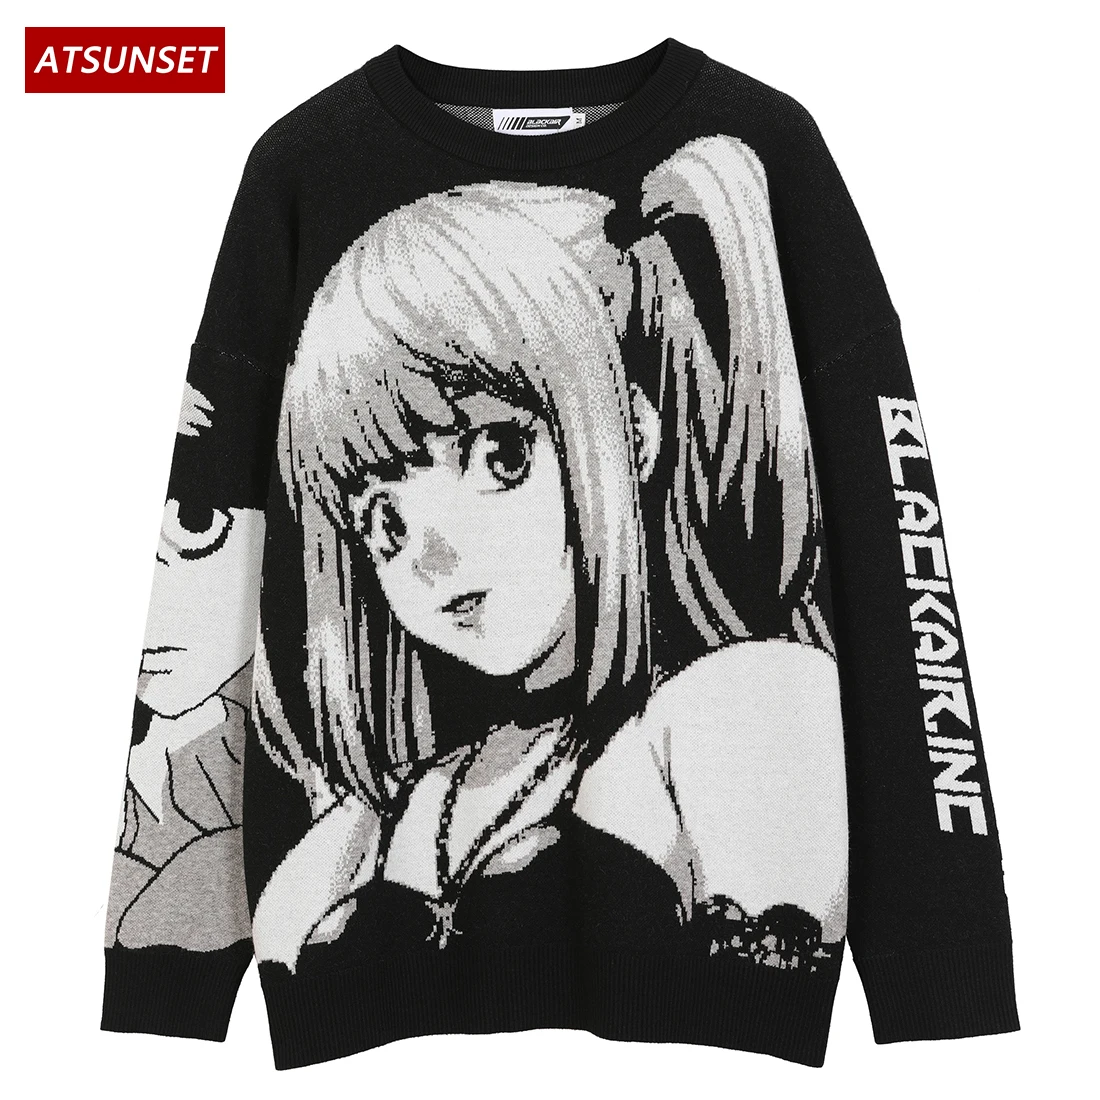 ATSUNSET Anime Girl Knitted Death Note Sweater Pullover 2021 Hip Hop Streetwear Vintage Style Harajuku Knitting Sweater